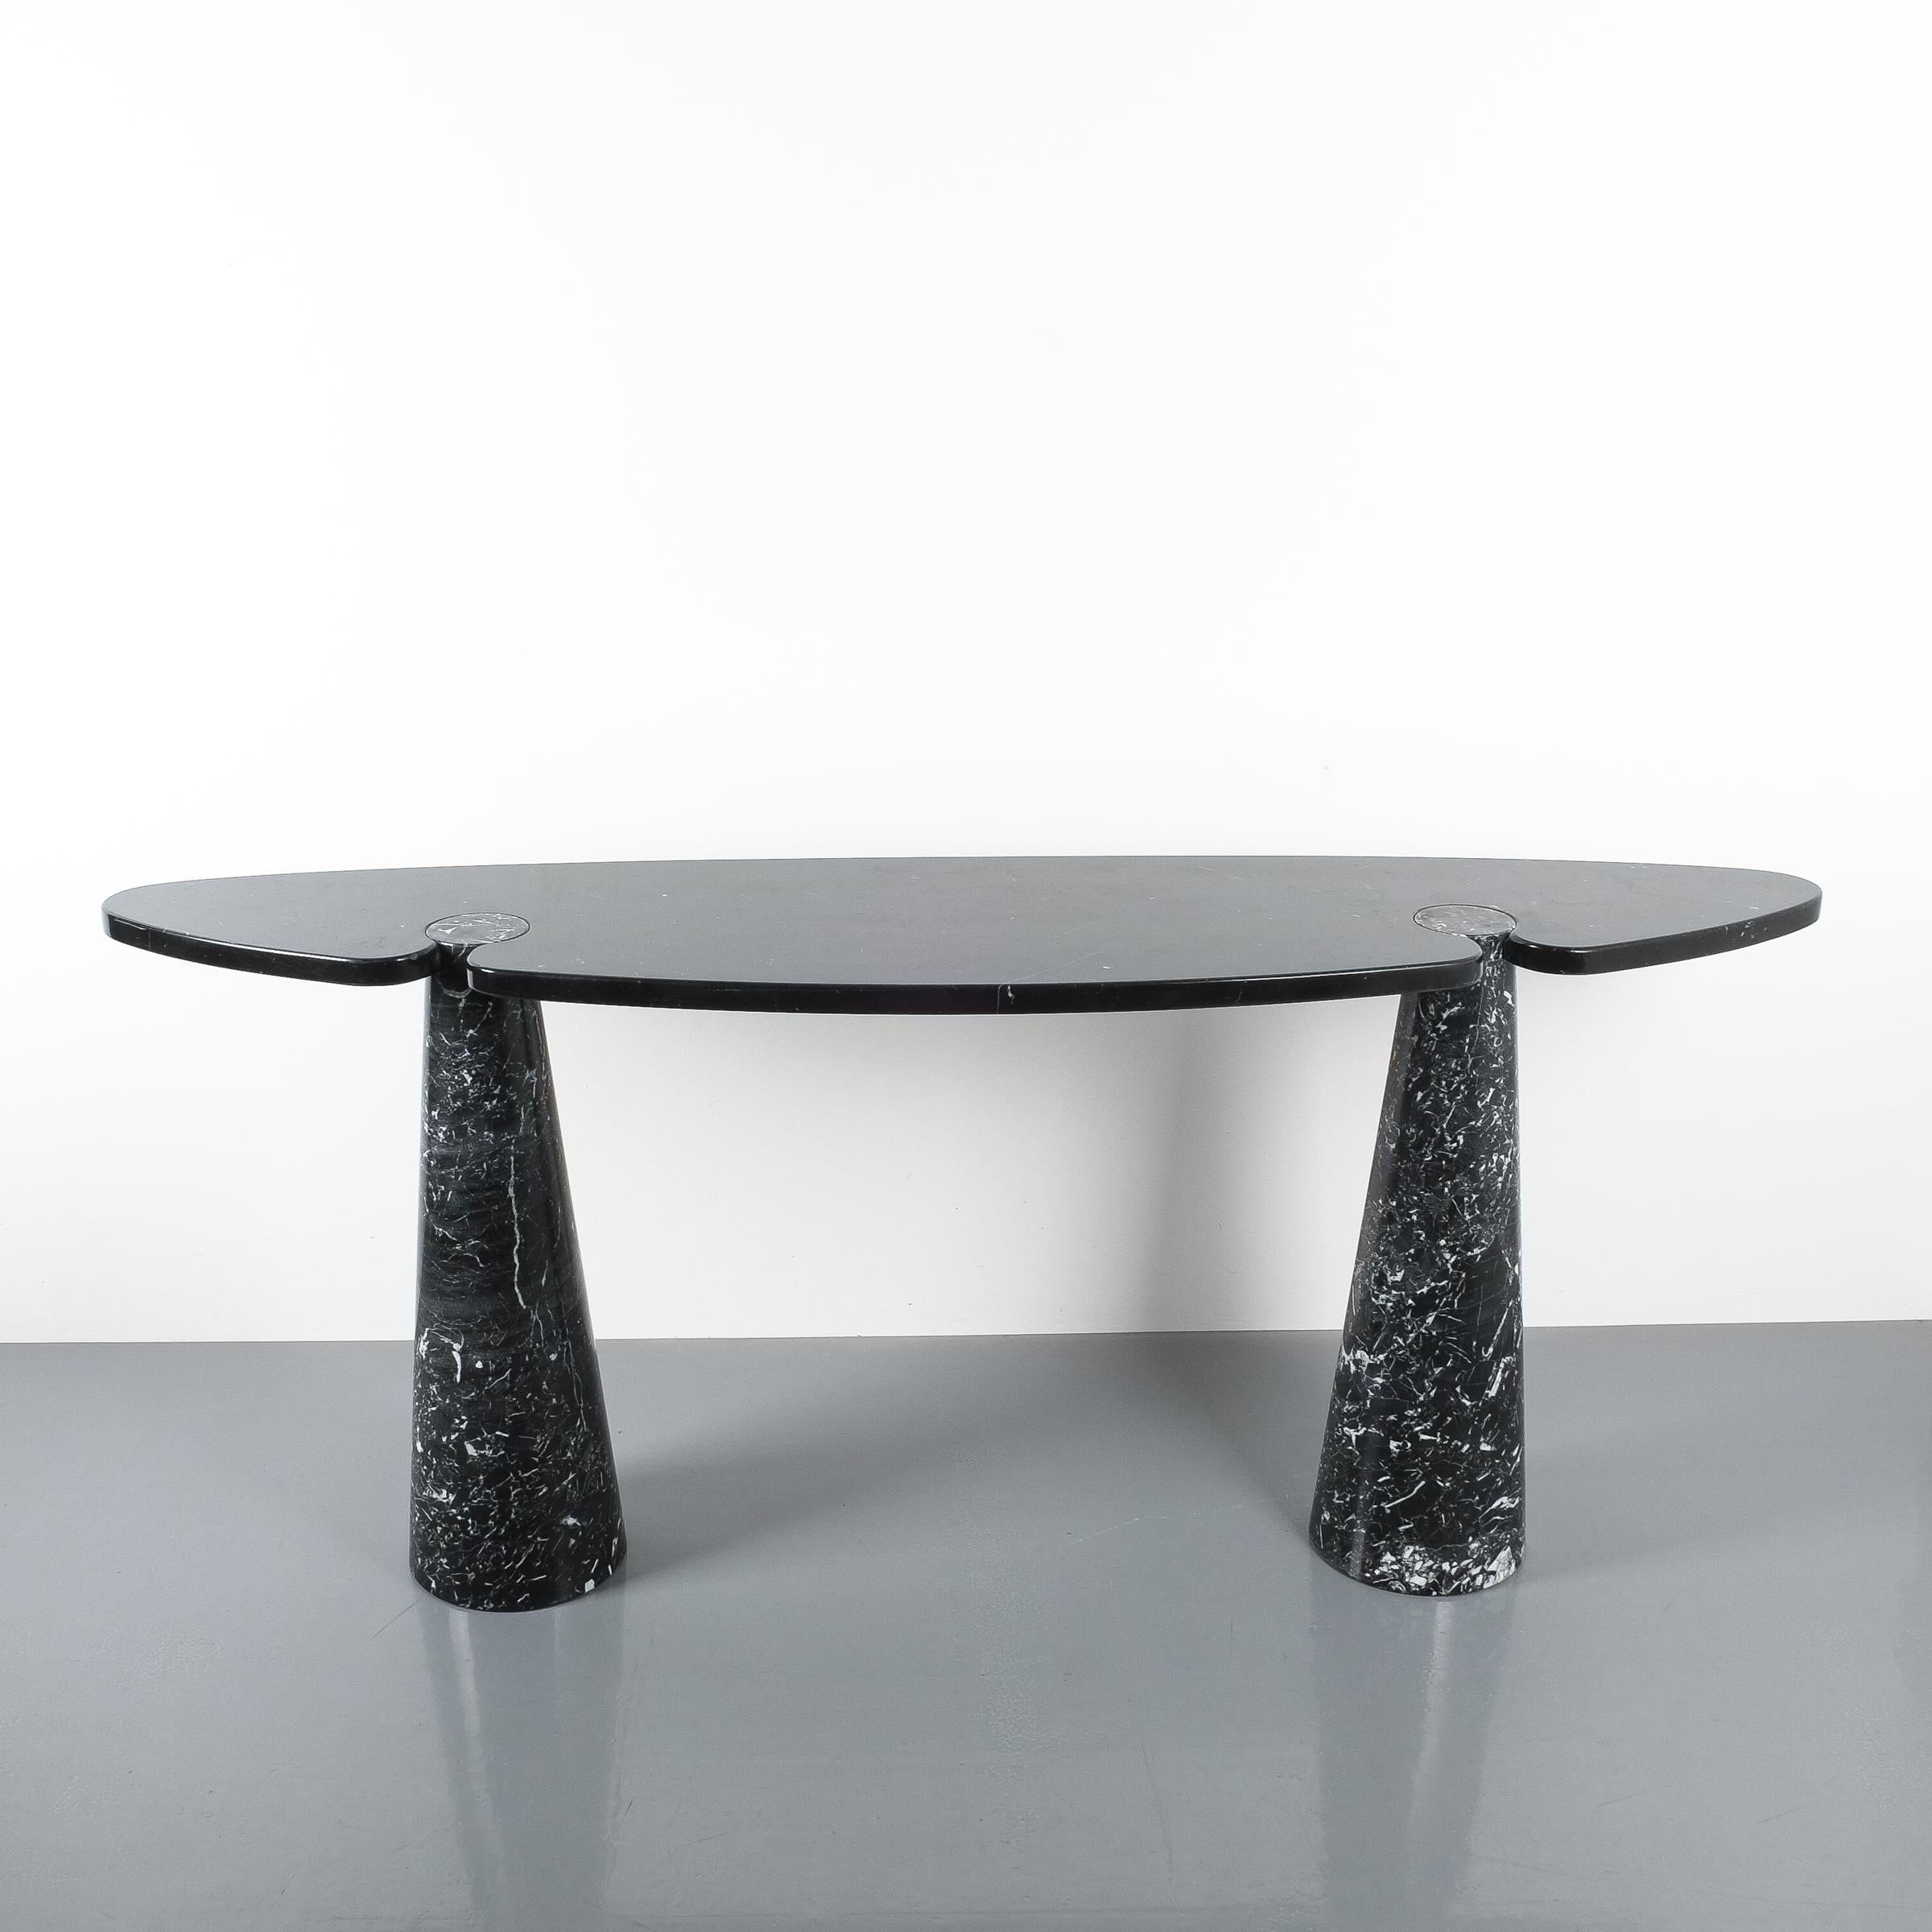 Angelo Mangiarotti console table Eros black marquina marble, Italy, circa 1975. Beautifully grained black and white solid marble piece with interlocking pedestals and tabletop. The table is in wonderful condition with hardly any wear. No chips or